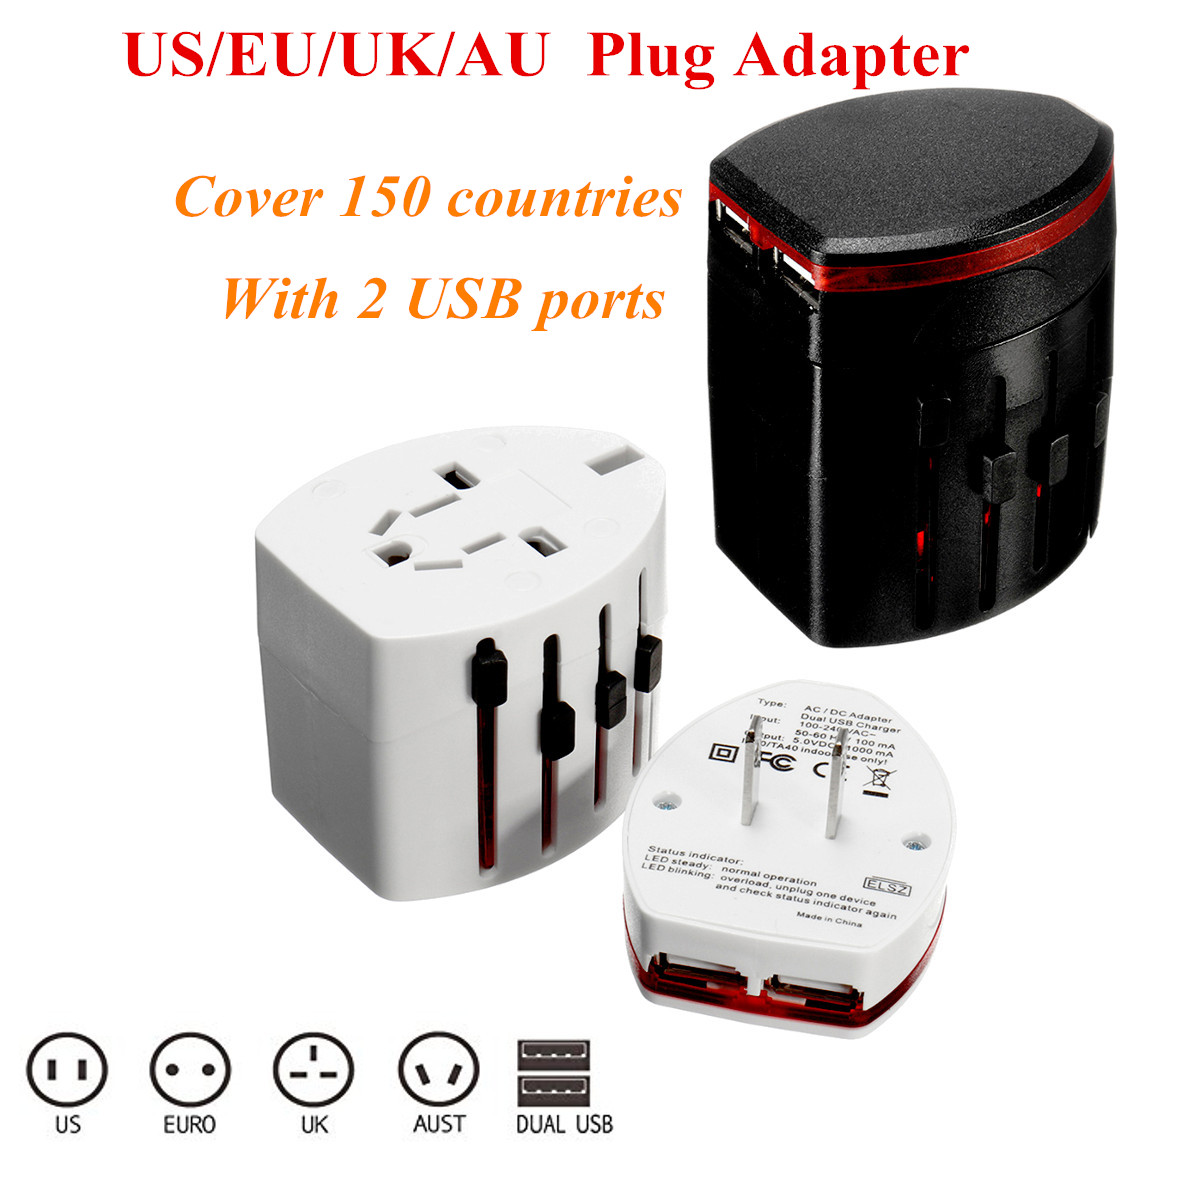 Universal-Travel-AC-Power-Charger-Adapter-Converter-AUUKUSEU-Plug-with-2-USB-Ports-1289576-1